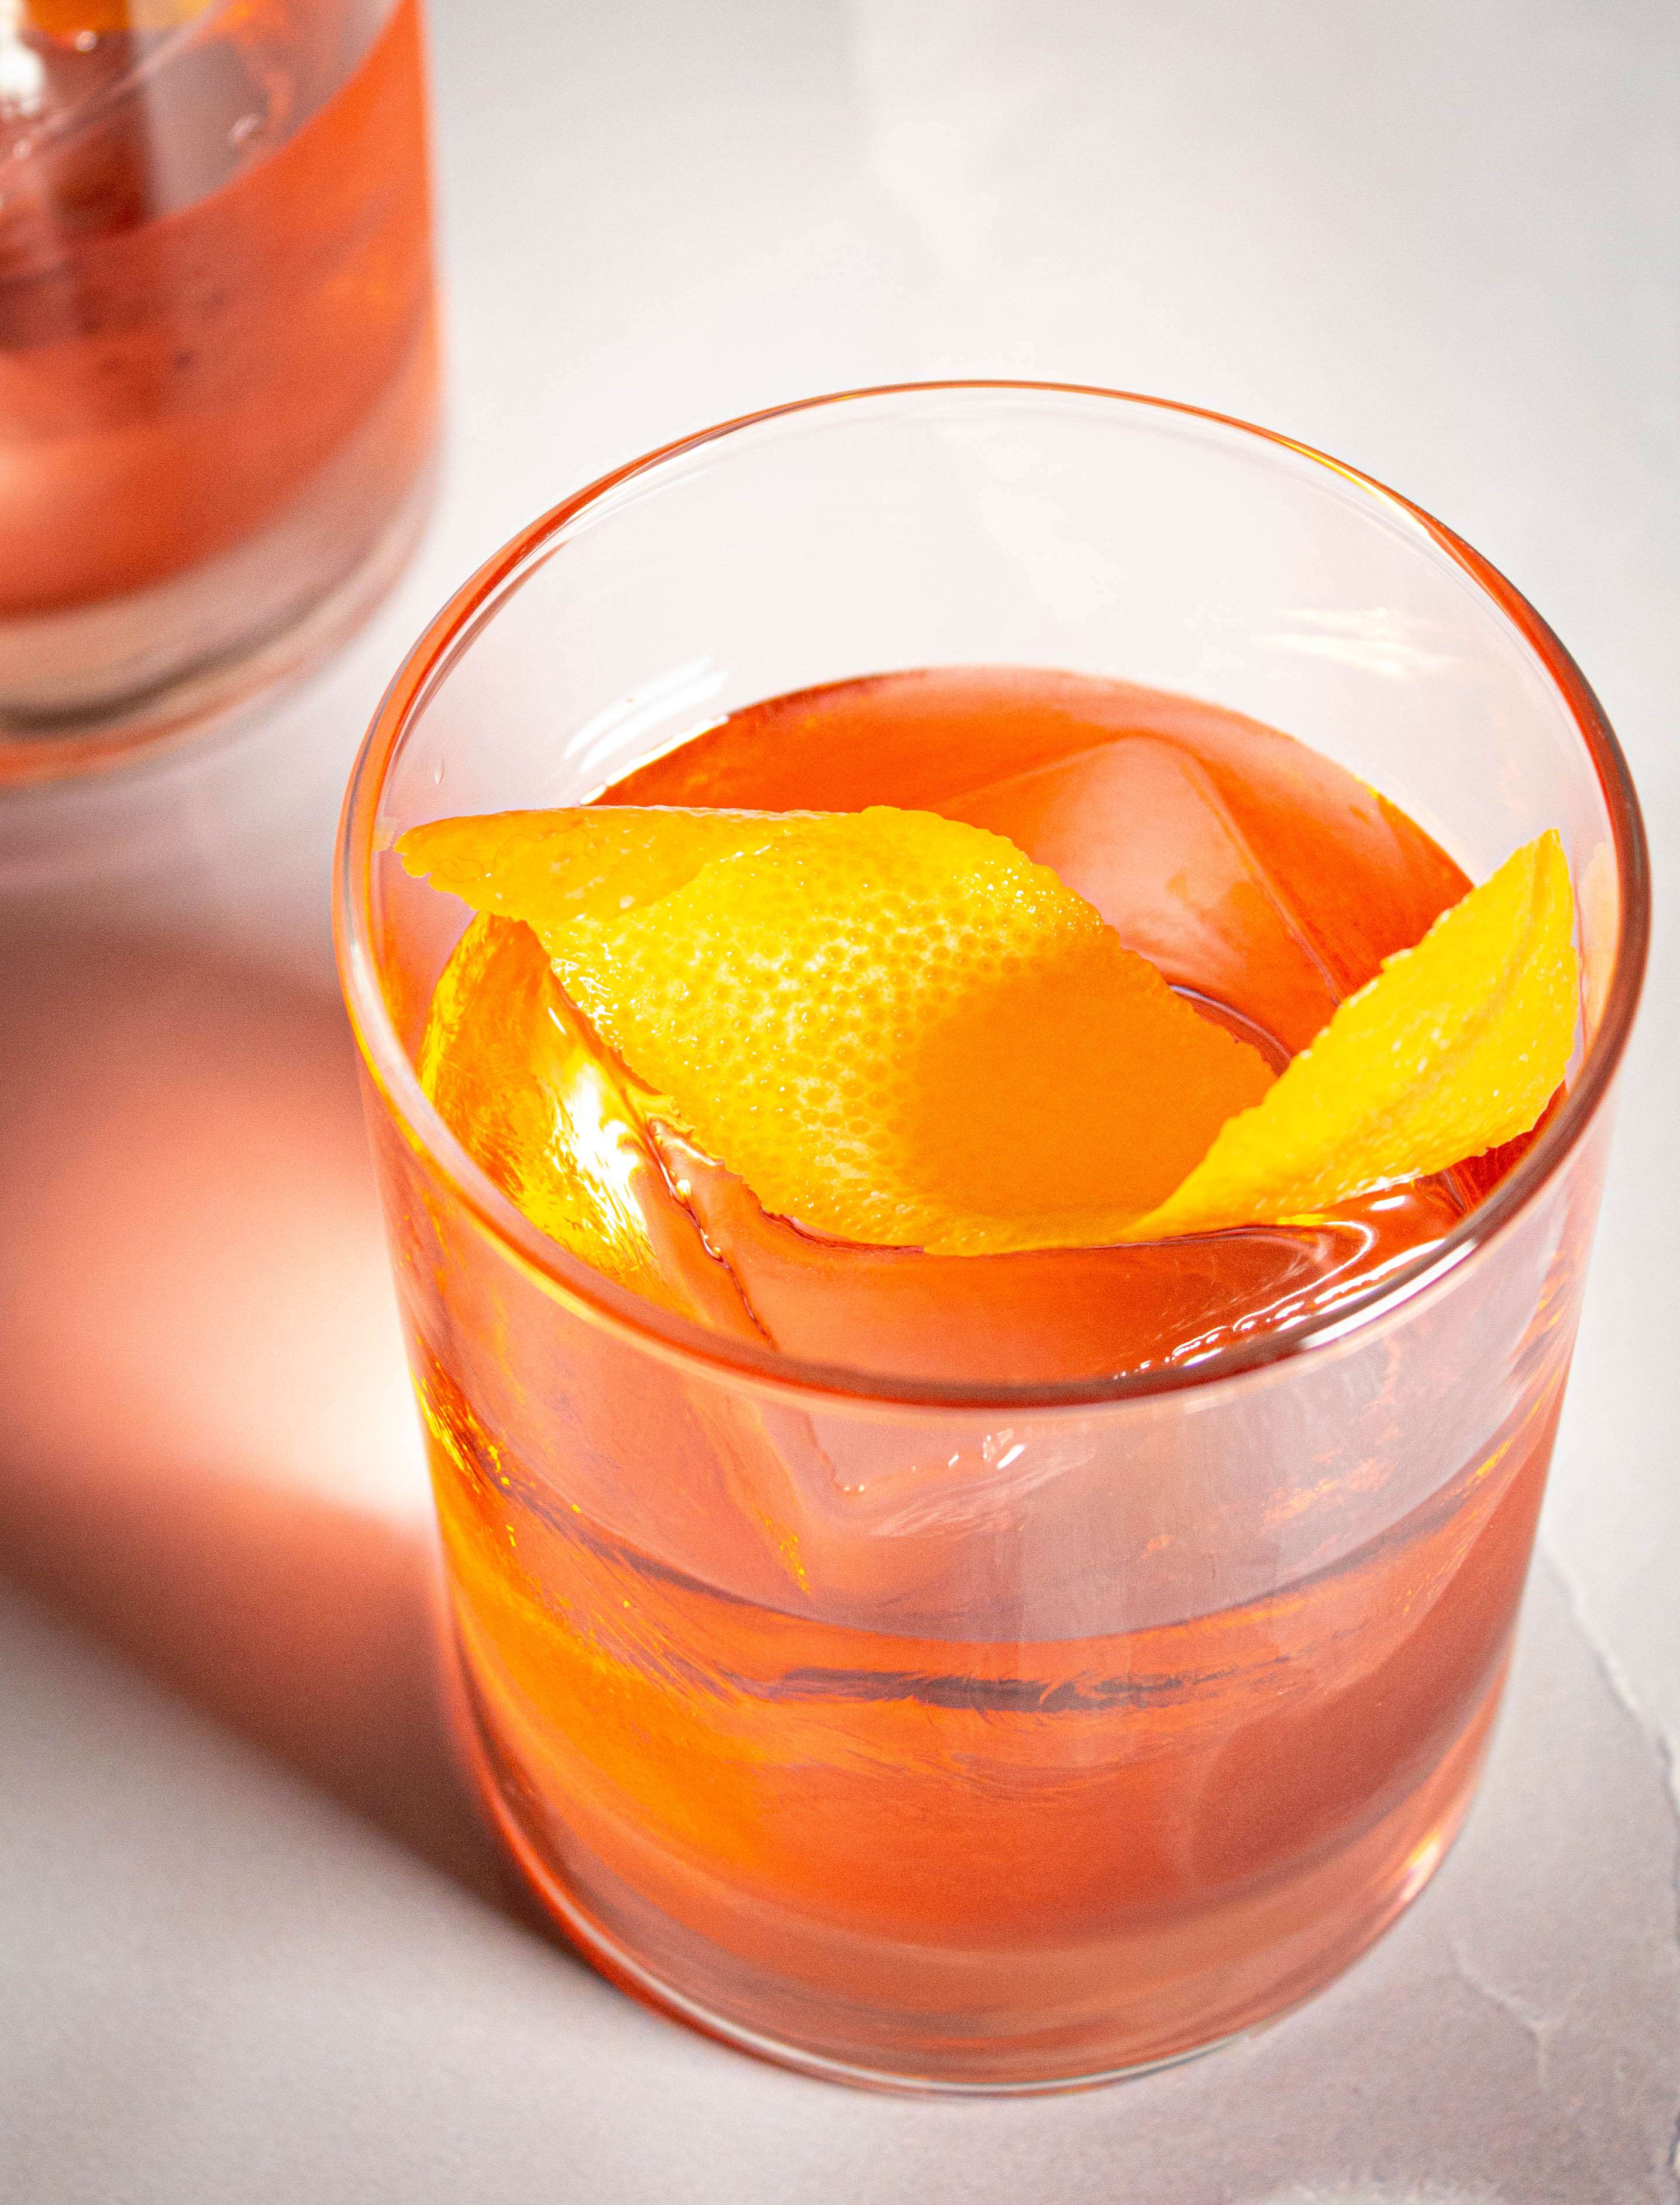 Rocks glass with orange-pink cocktail with a large square cube and orange peel twist.